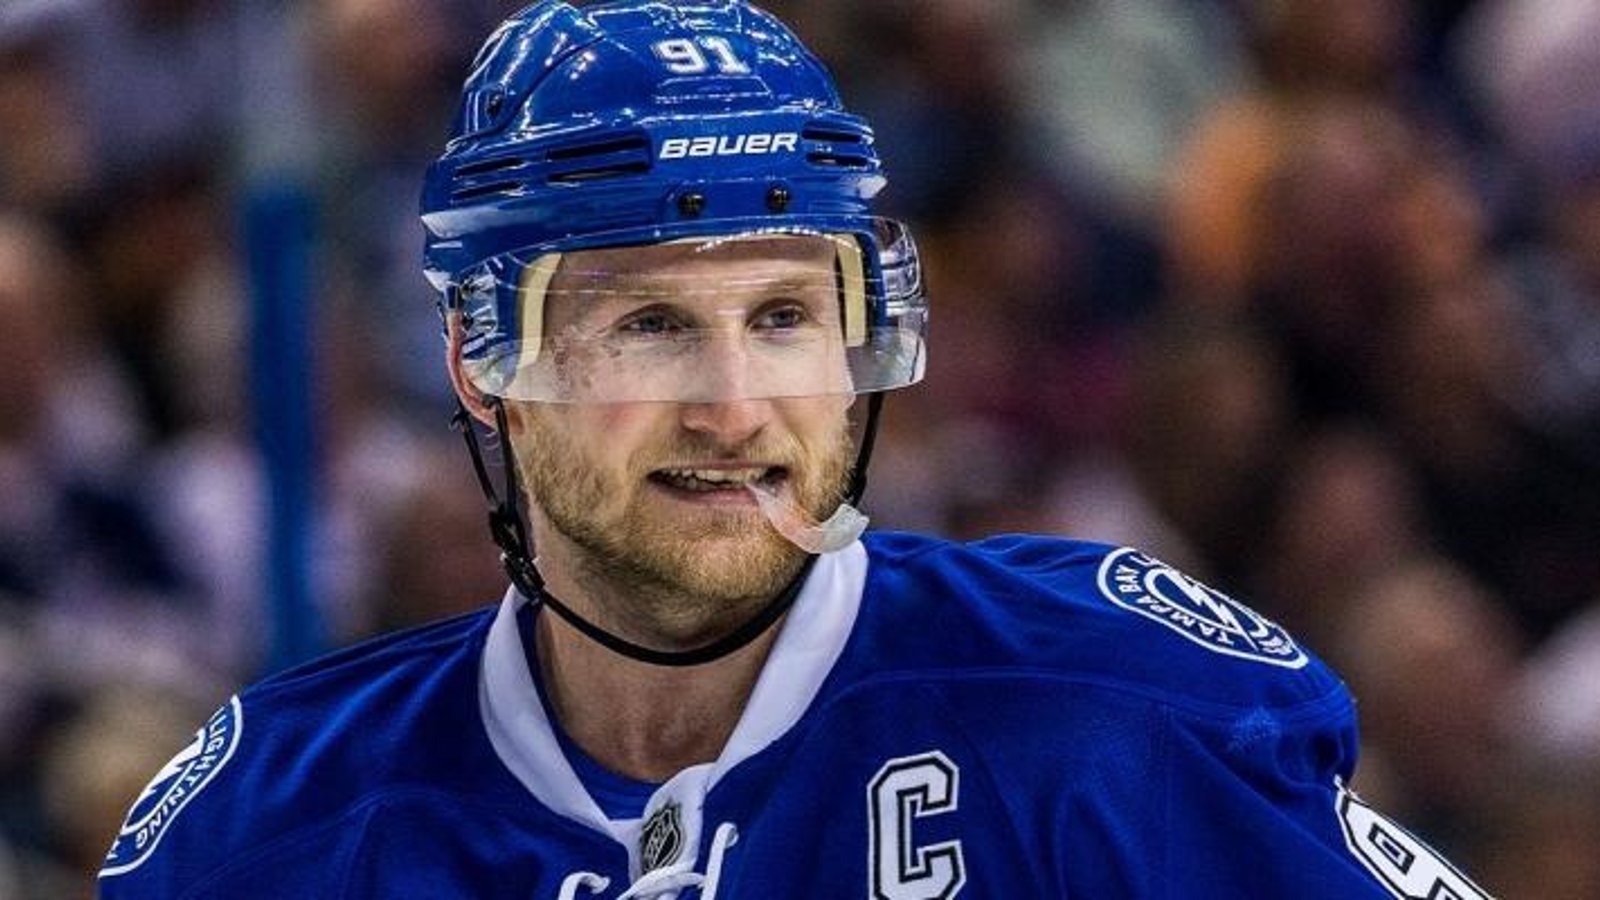 Stamkos starts off his audition with a bang!